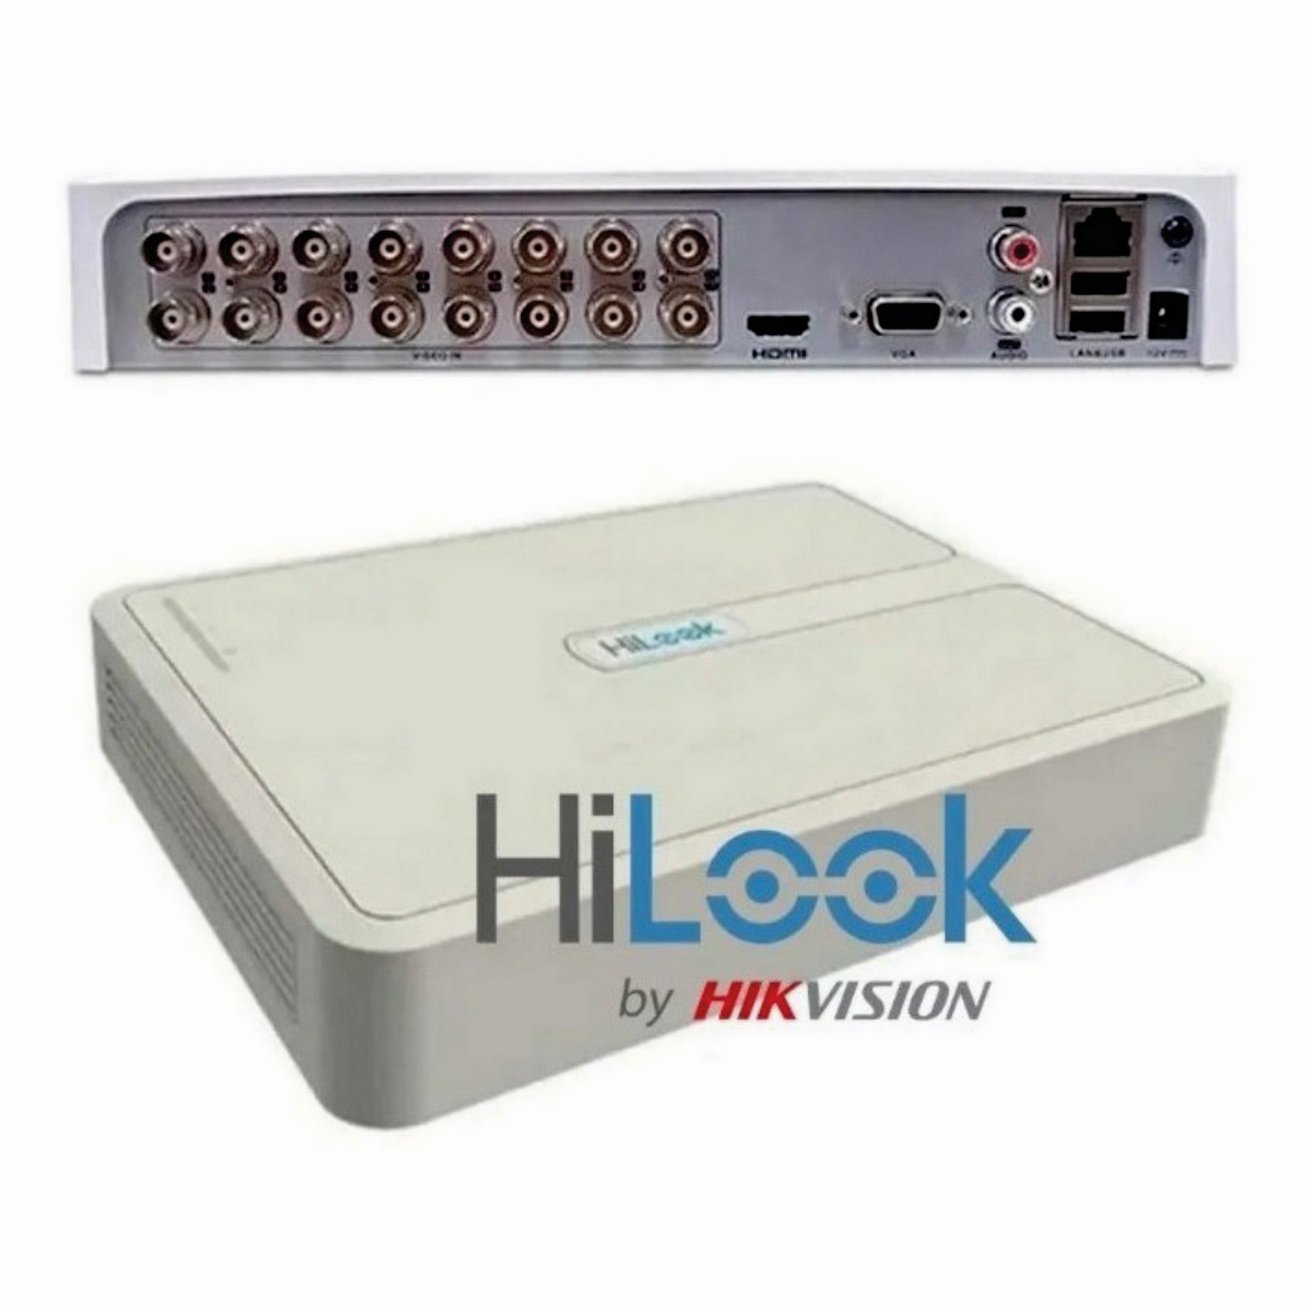 DVR Stand Alone 16 Canais Full HD 1080p Lite DVR-116G-K1 HiLook - 9